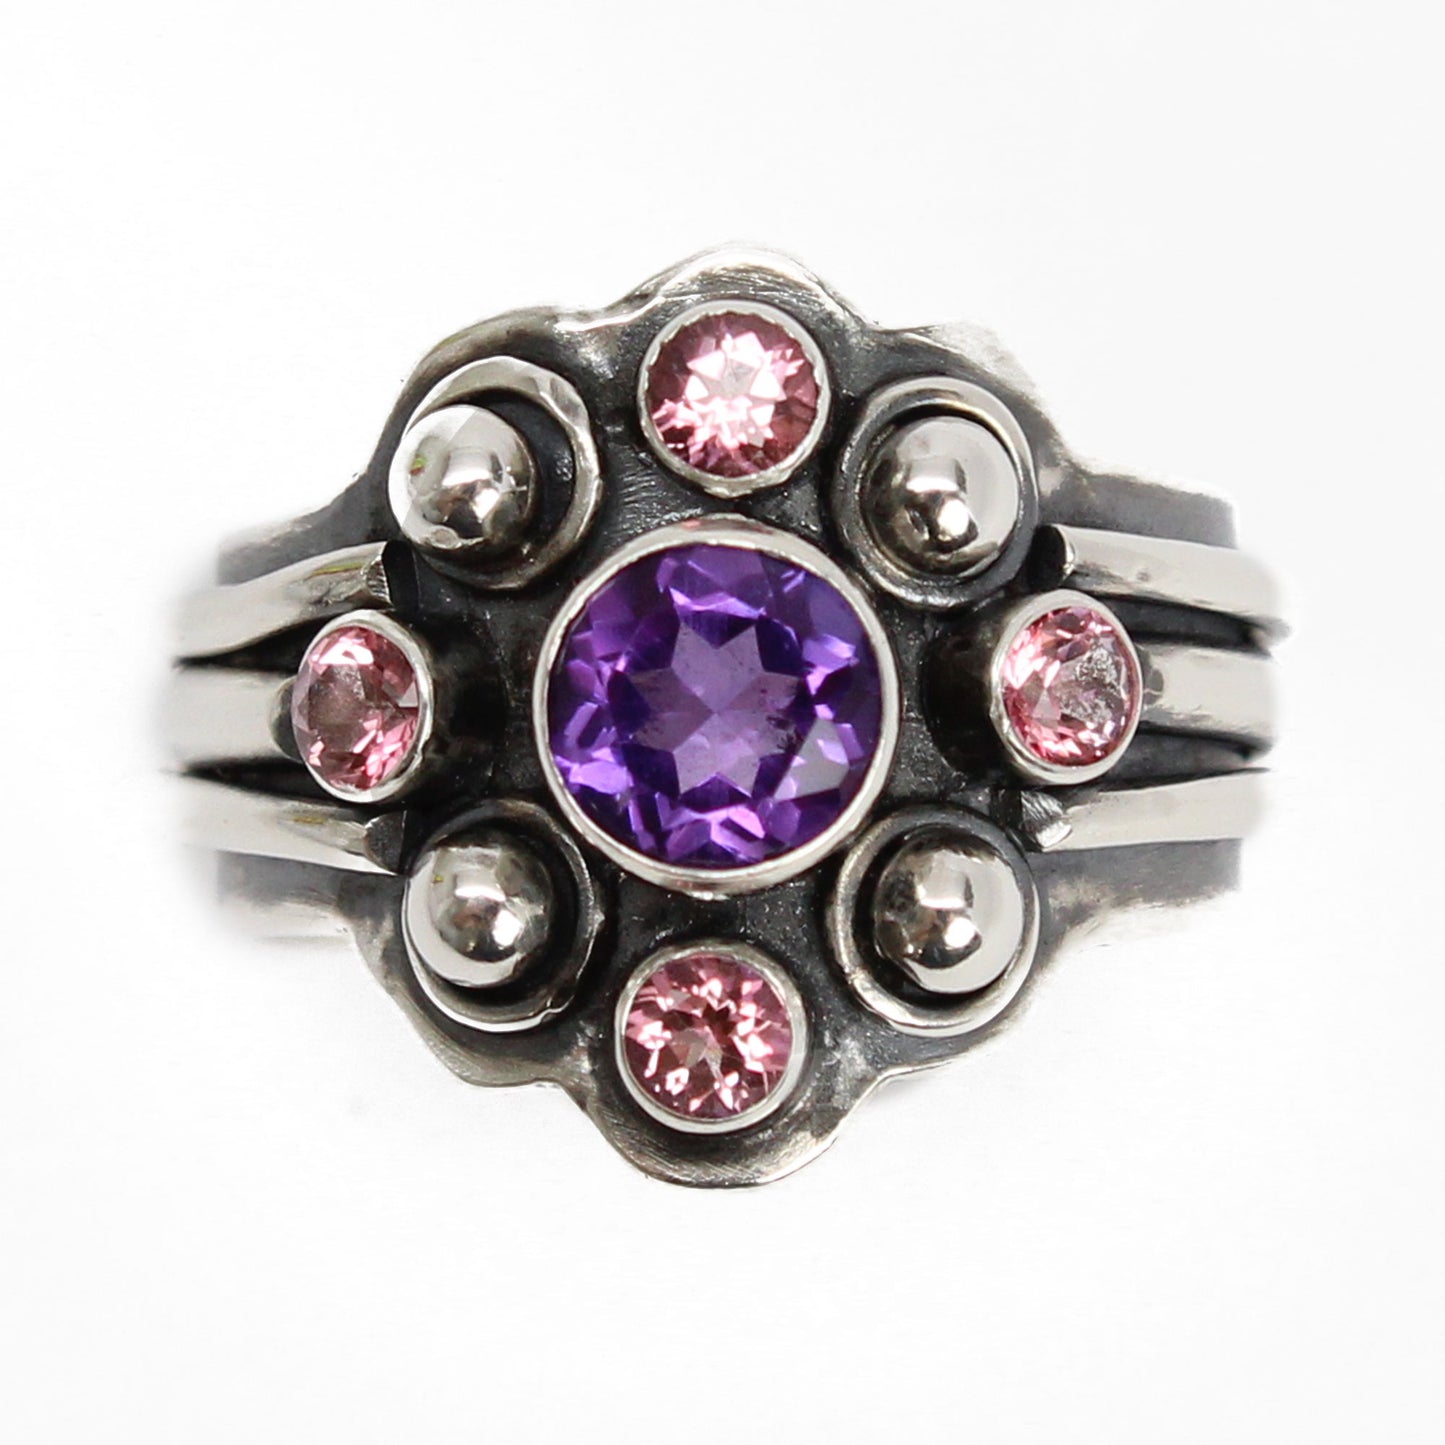 Handmade Amethyst and Topaz Ring in Sterling Silver 7.25 US